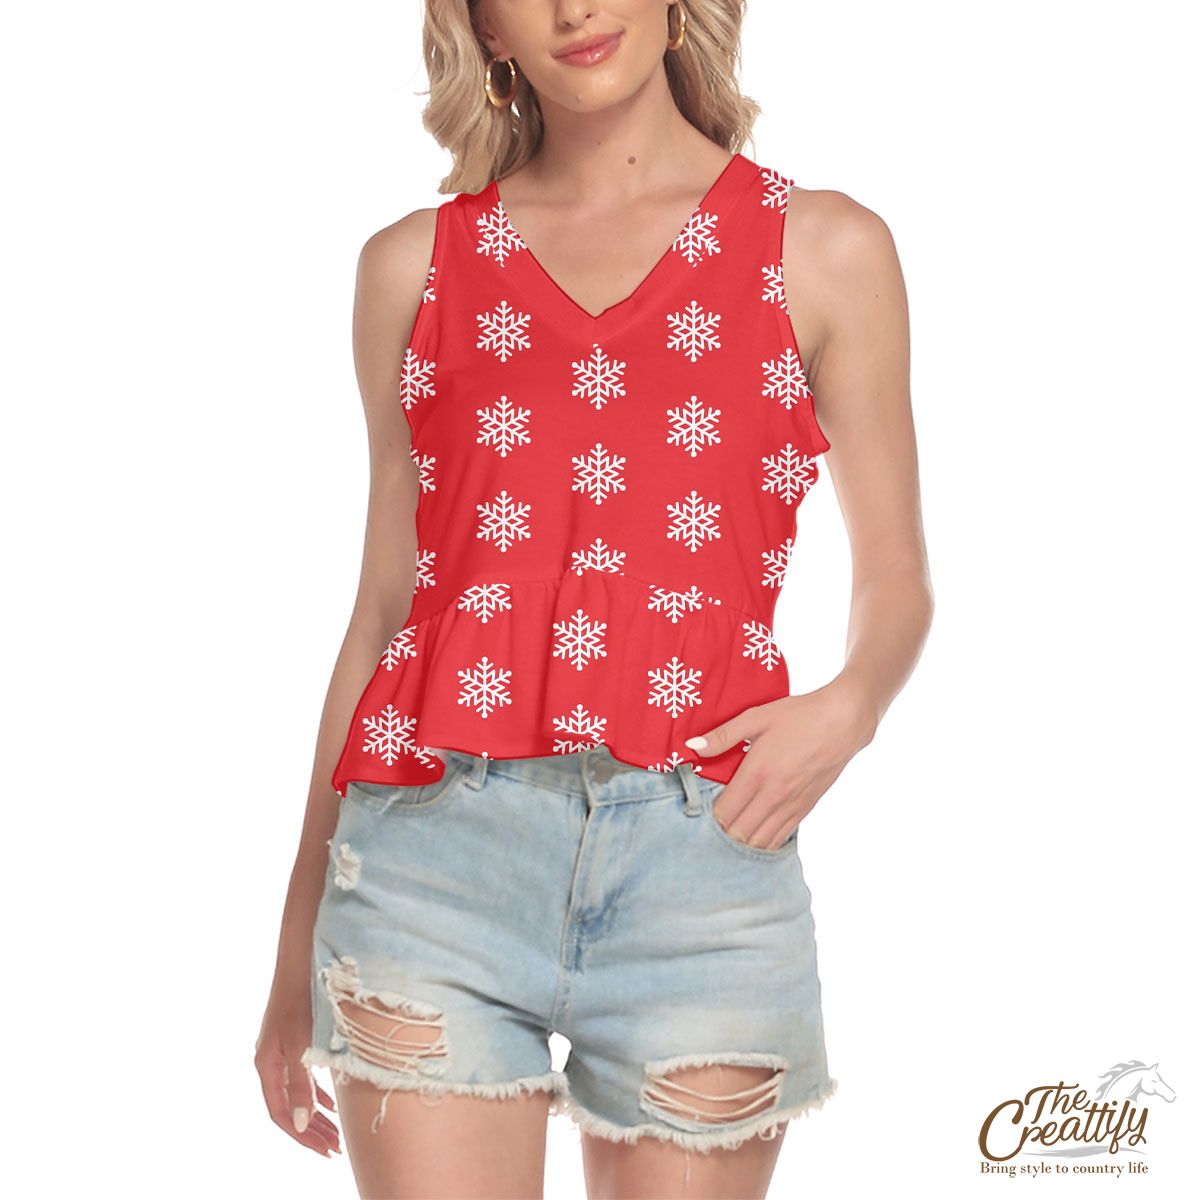 Snowflake Pattern, Christmas Snowflakes, Christmas Present Ideas With Red V-Neck Ruffle Hem Blouse